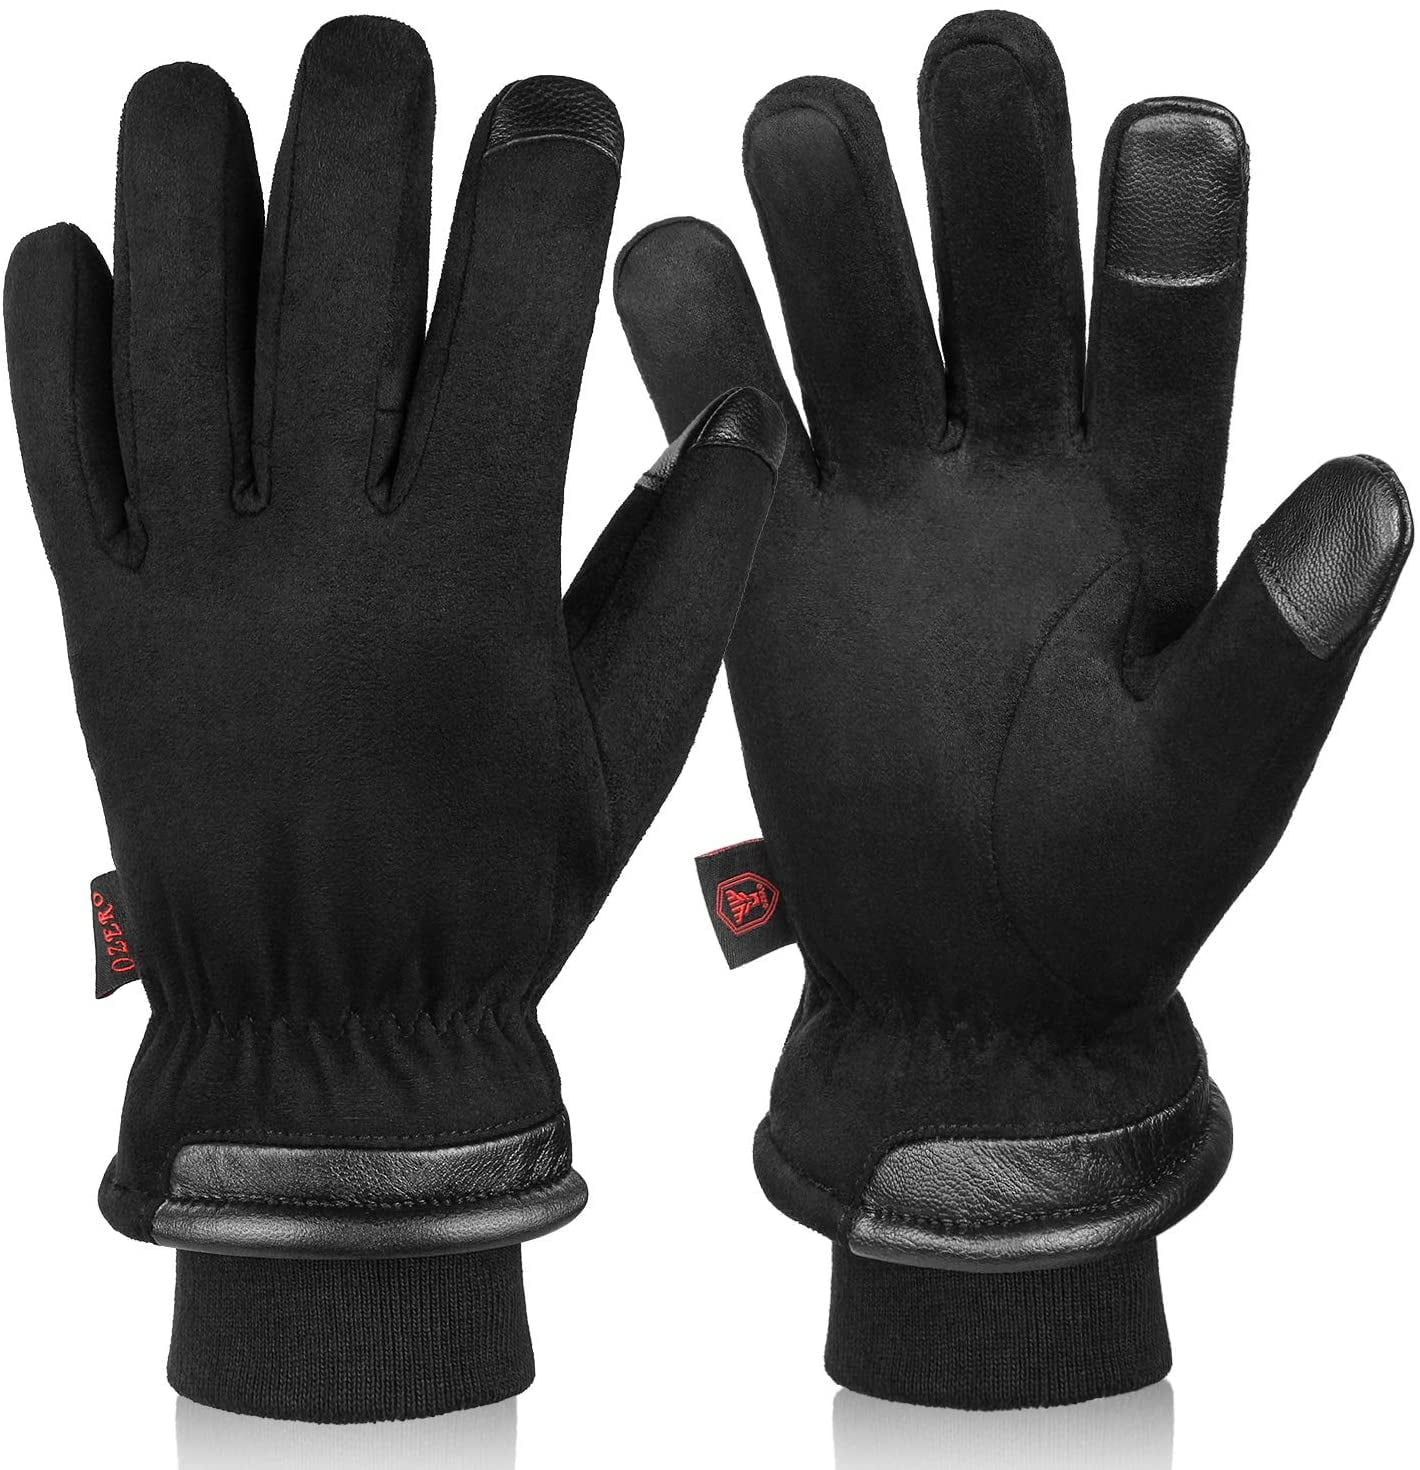 Details about   Cold-proof Ski Gloves Waterproof Winter Gloves Weather Windproof Anti Slip